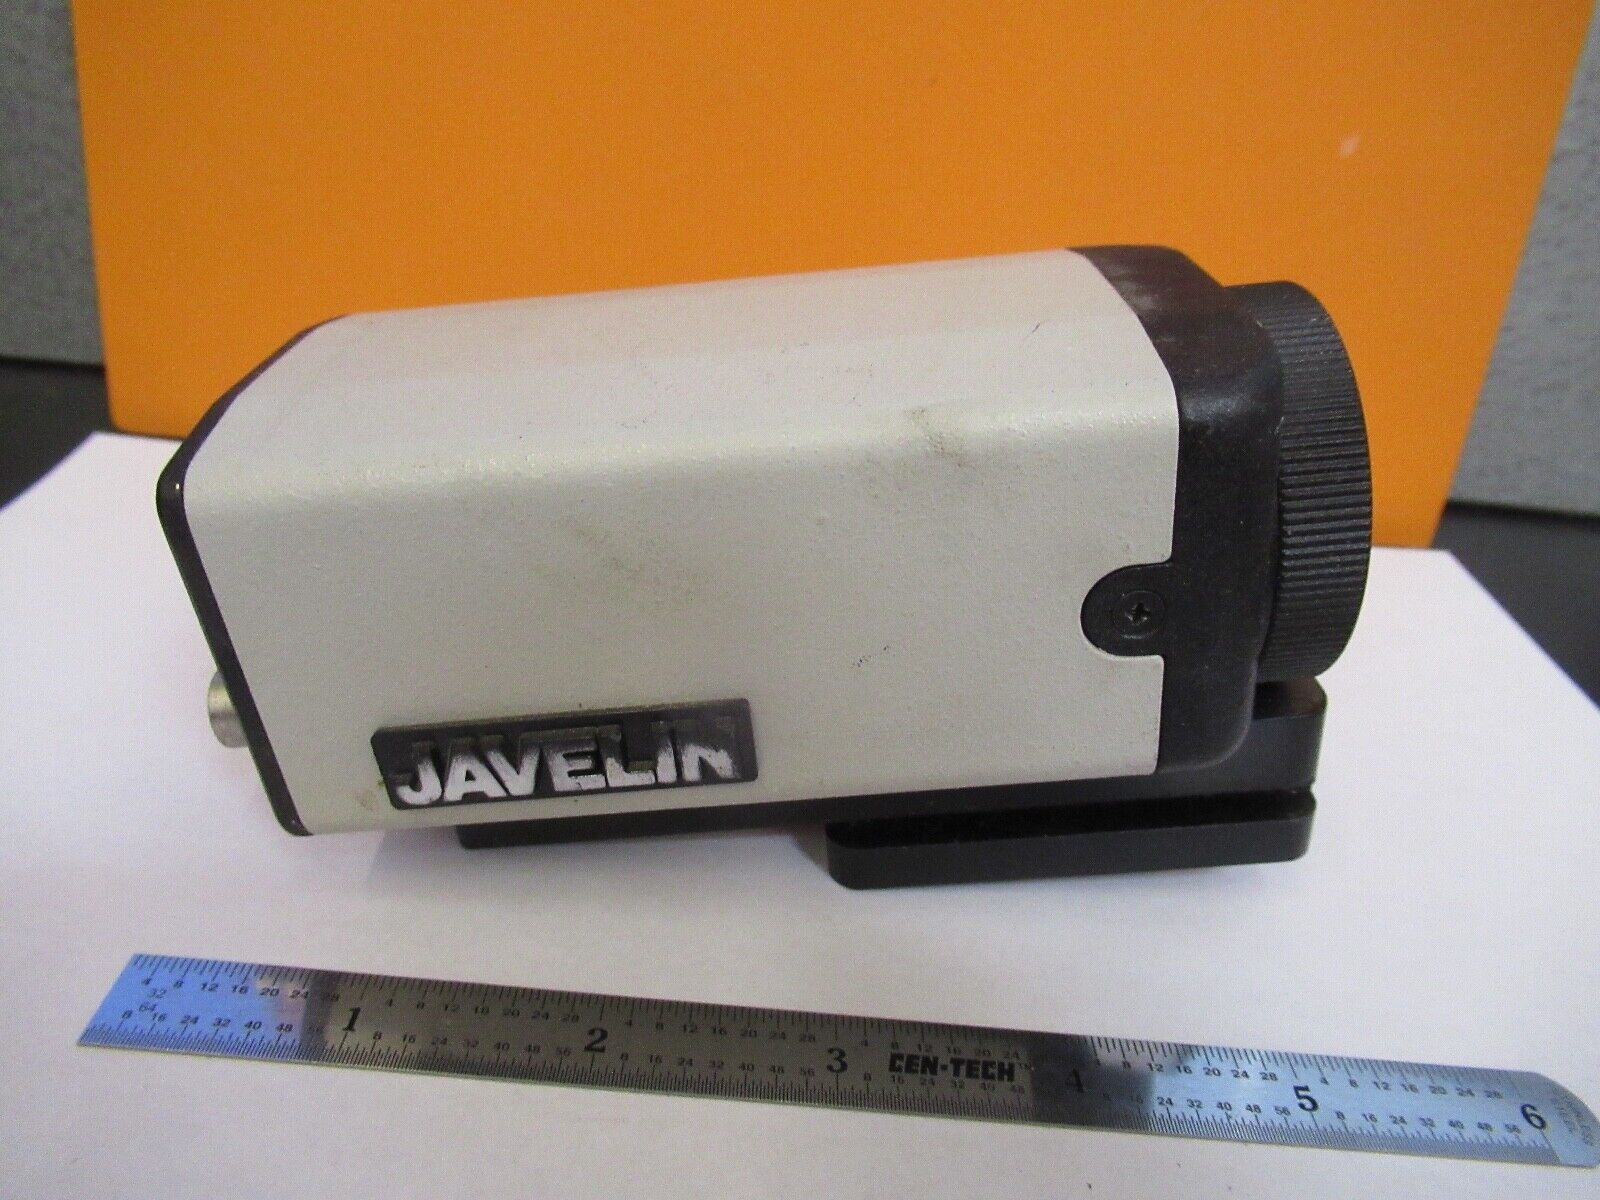 CCD Free shipping on posting Excellence reviews CAMERA JAVELIN MICROSCOPE PART INSPECTION OPTICS AS PICTURED